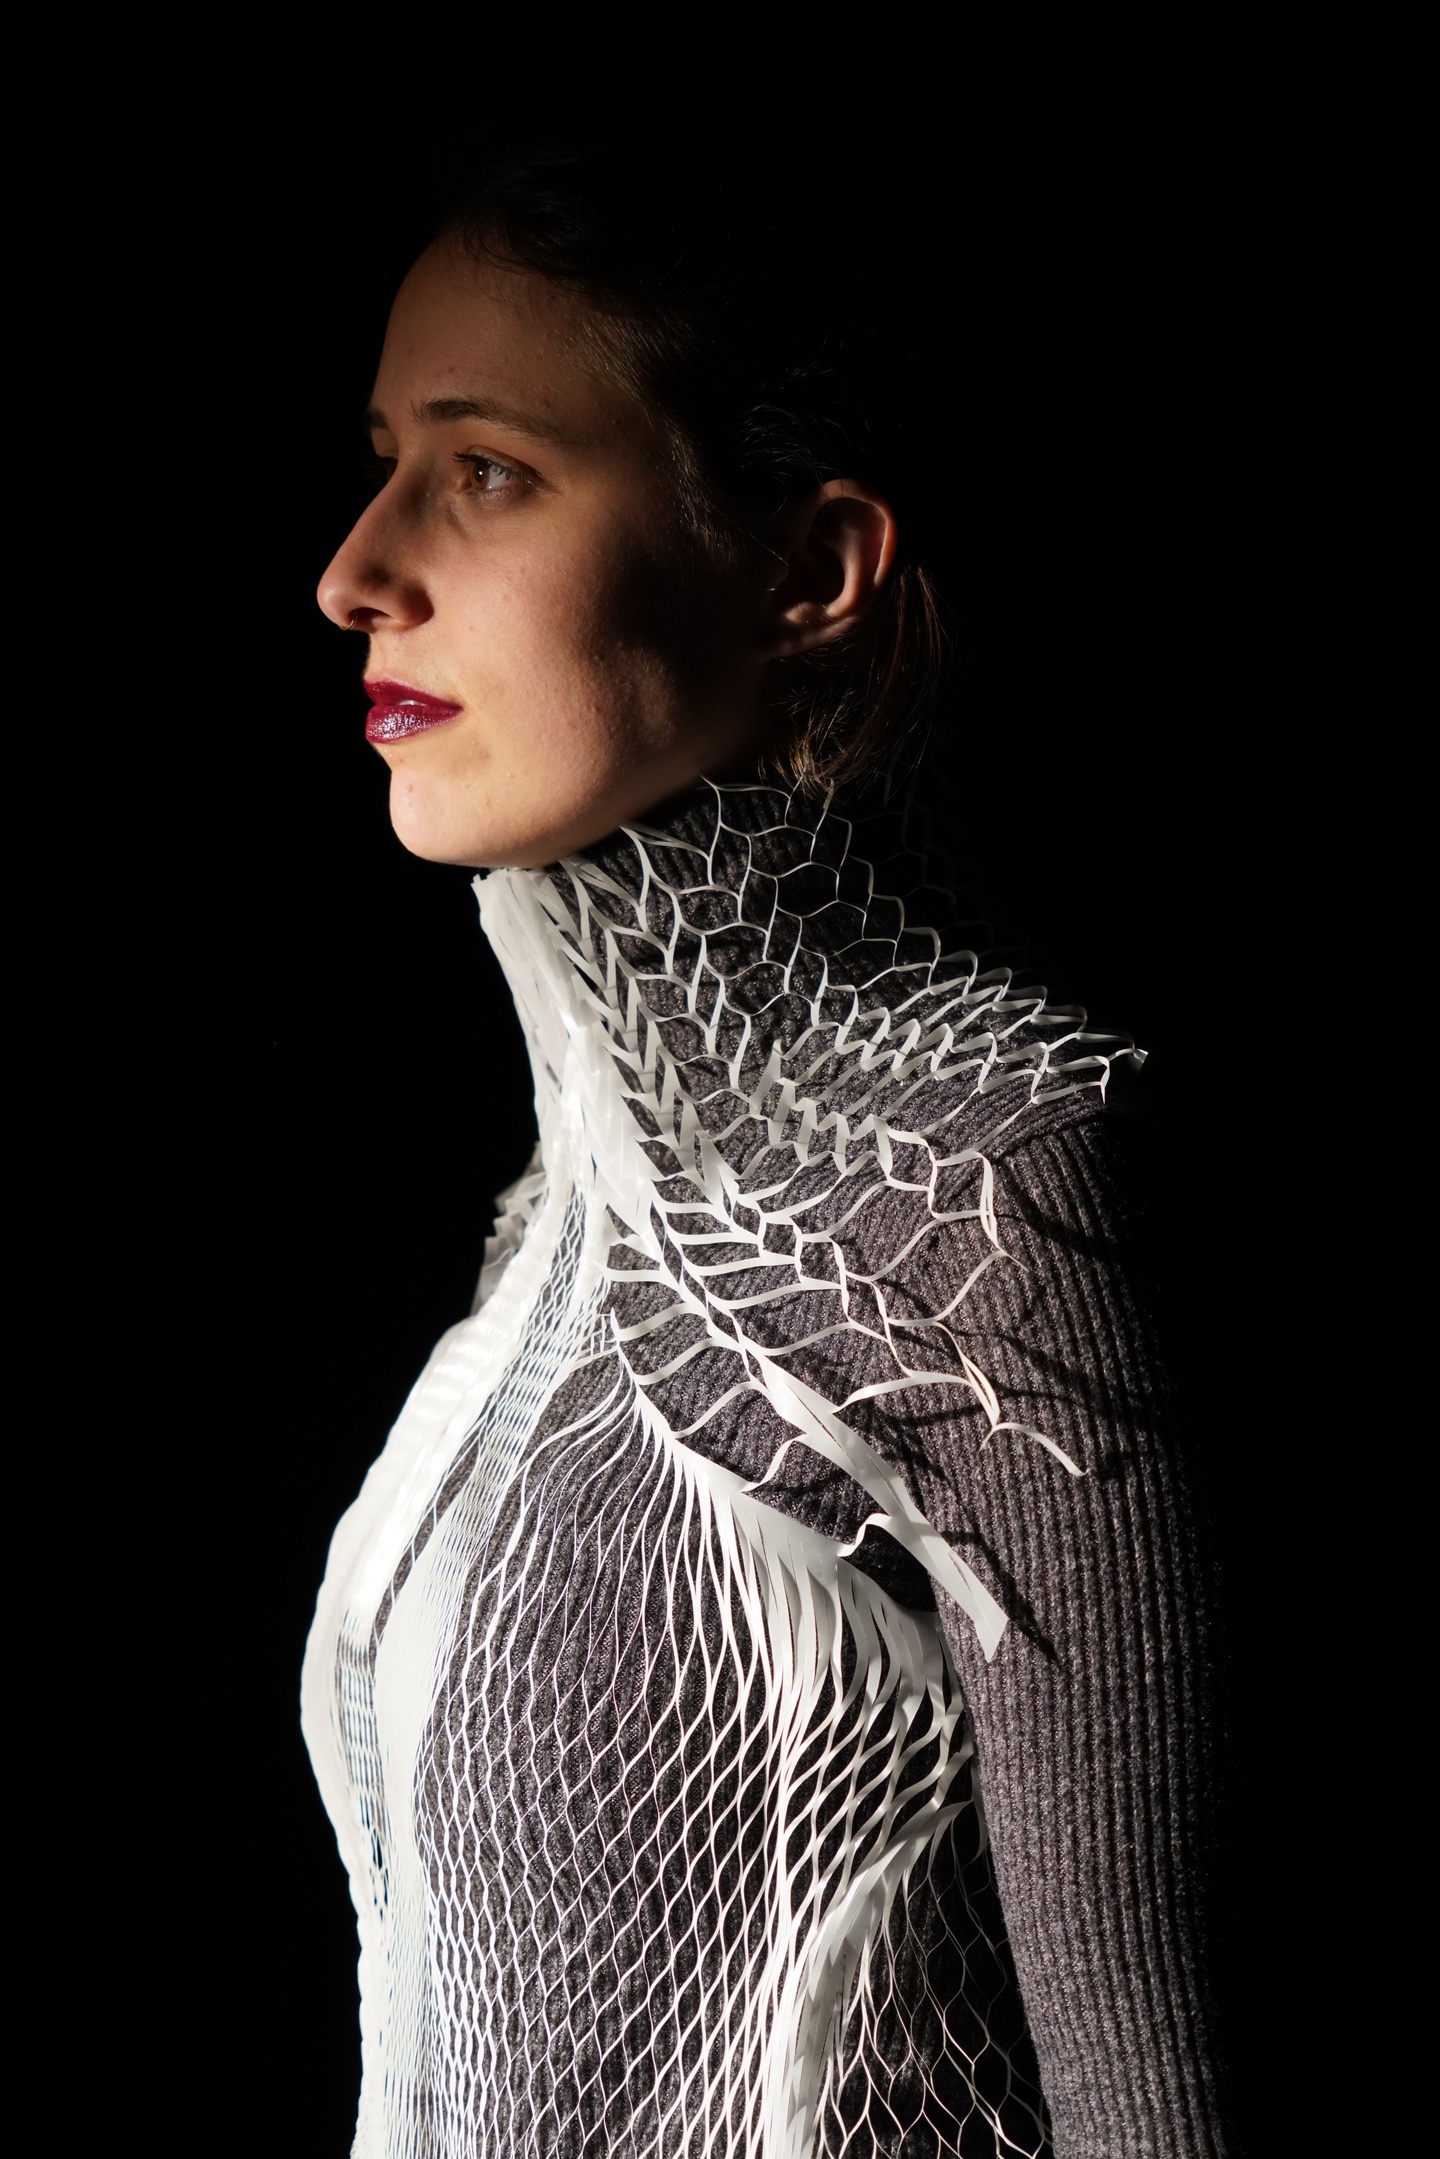 Person's torso in profile wearing a white 3D printed mesh vest with collar over a grey turtleneck.